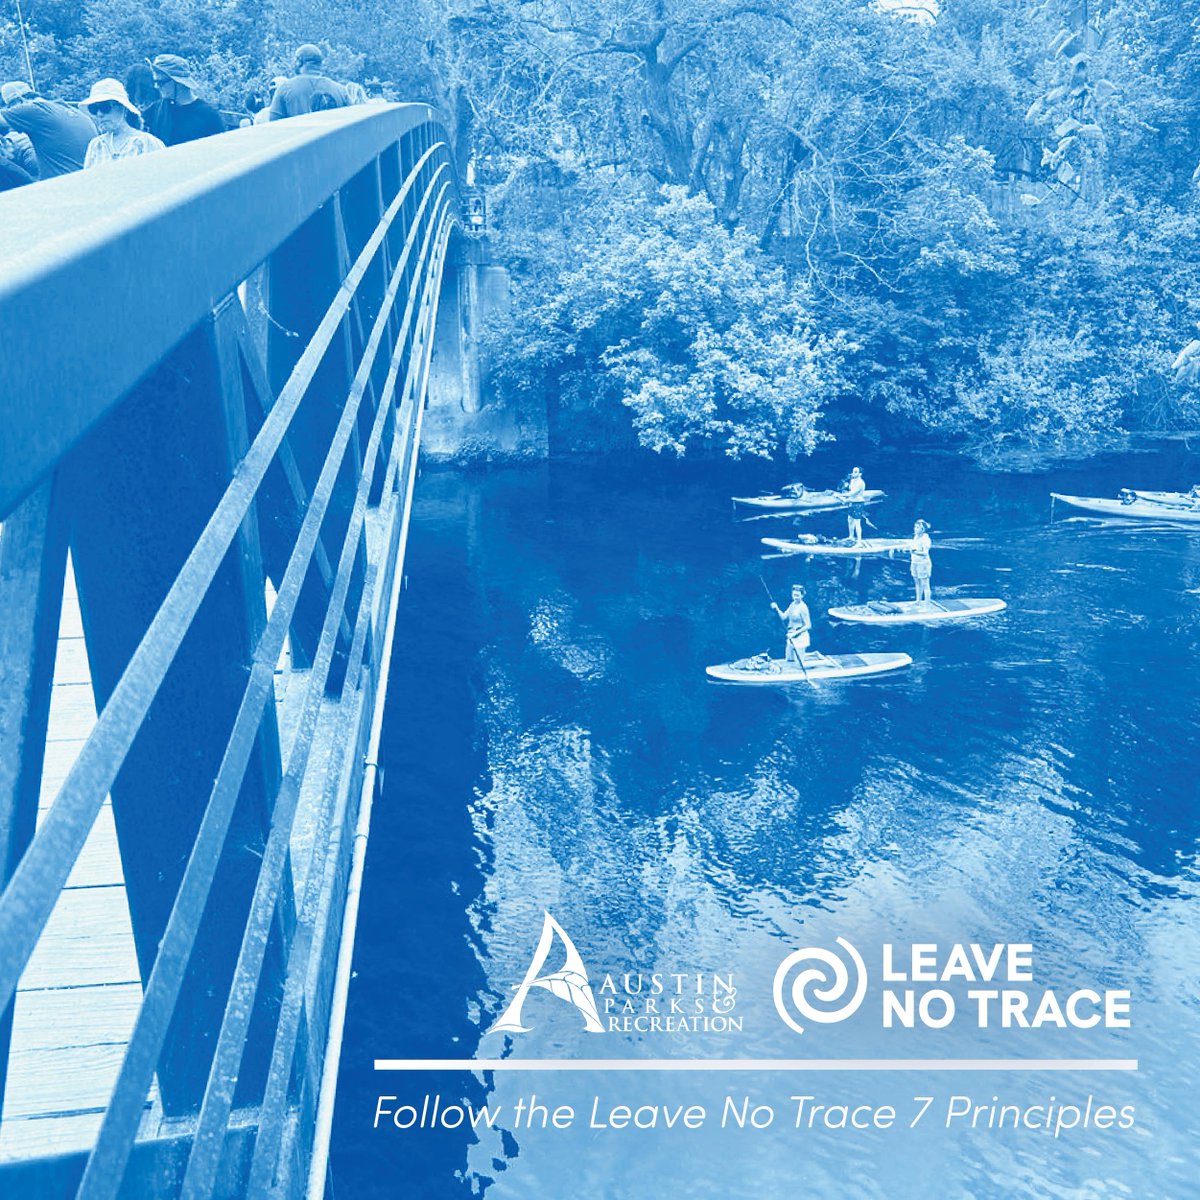 Each year bridge jumpers get injured when they hit the water and boaters get injured by a person jumping. It's illegal to jump from Austin's bridges and/or to swim in Lady Bird Lake. Be considerate and be safe. Leave No Trace 7 Principles: AustinTexas.gov/LeaveNoTrace